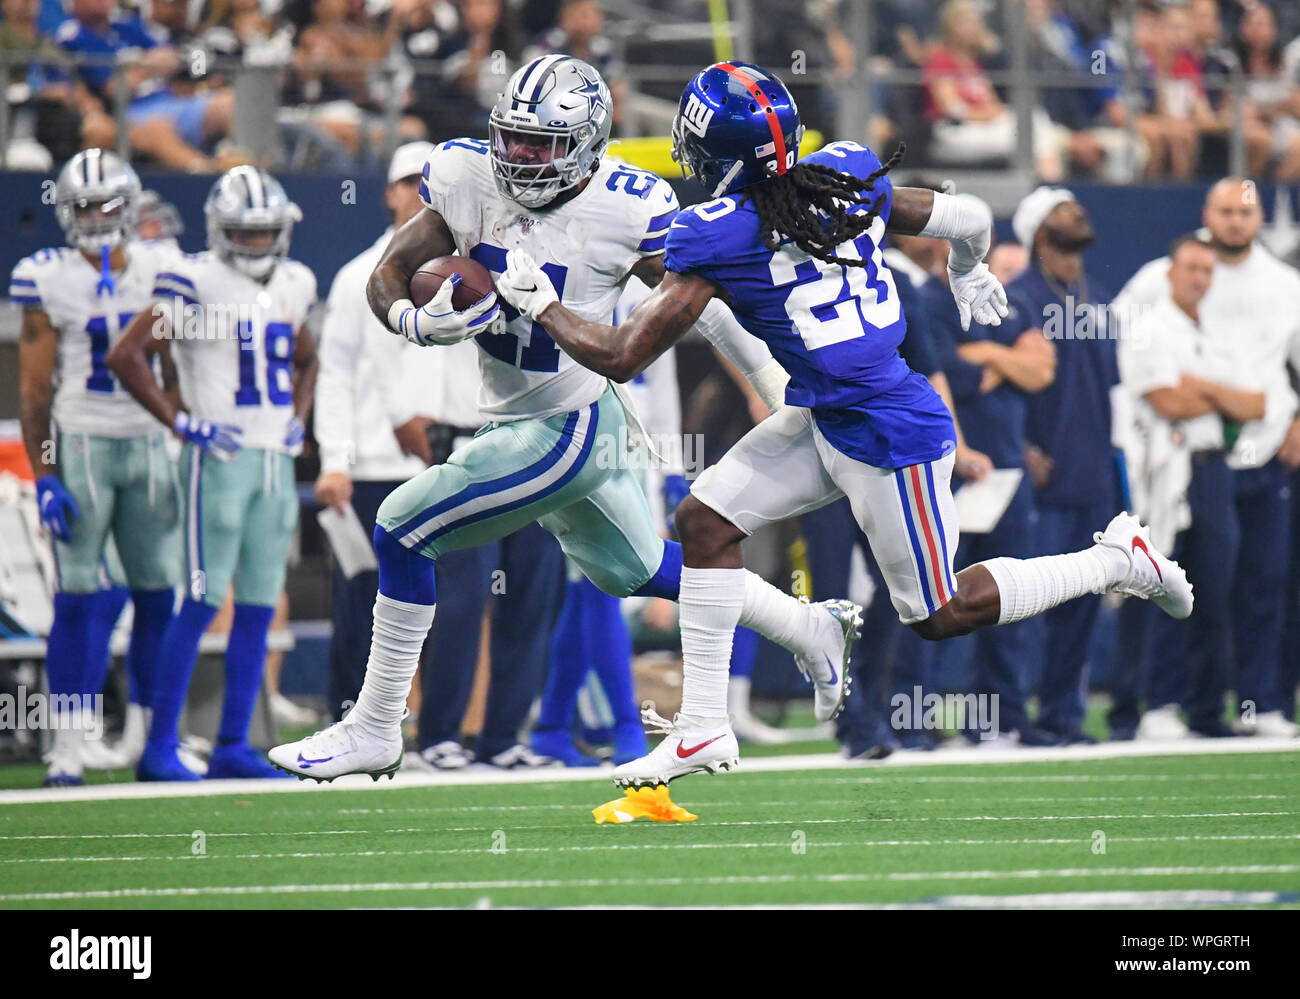 Sep 08, 2019: Dallas Cowboys running back Ezekiel Elliott #21 rushed for 53 yards on 13 carries during an NFL game between the New York Giants and the Dallas Cowboys at AT&T Stadium in Arlington, TX Dallas defeated New York 35-17 Albert Pena/CSM Stock Photo